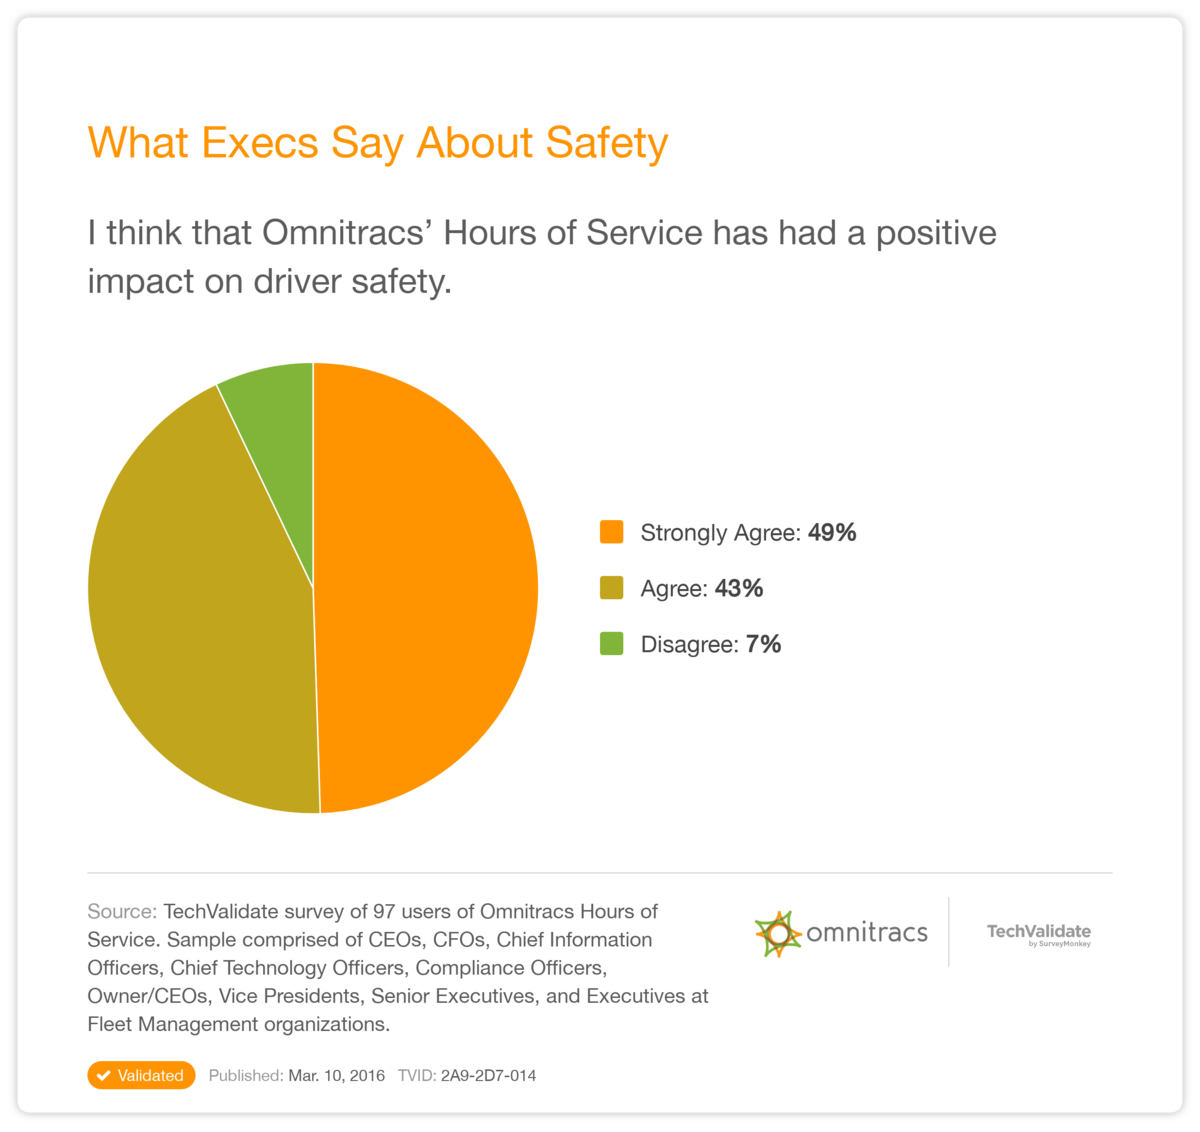 What Execs Say About Safety